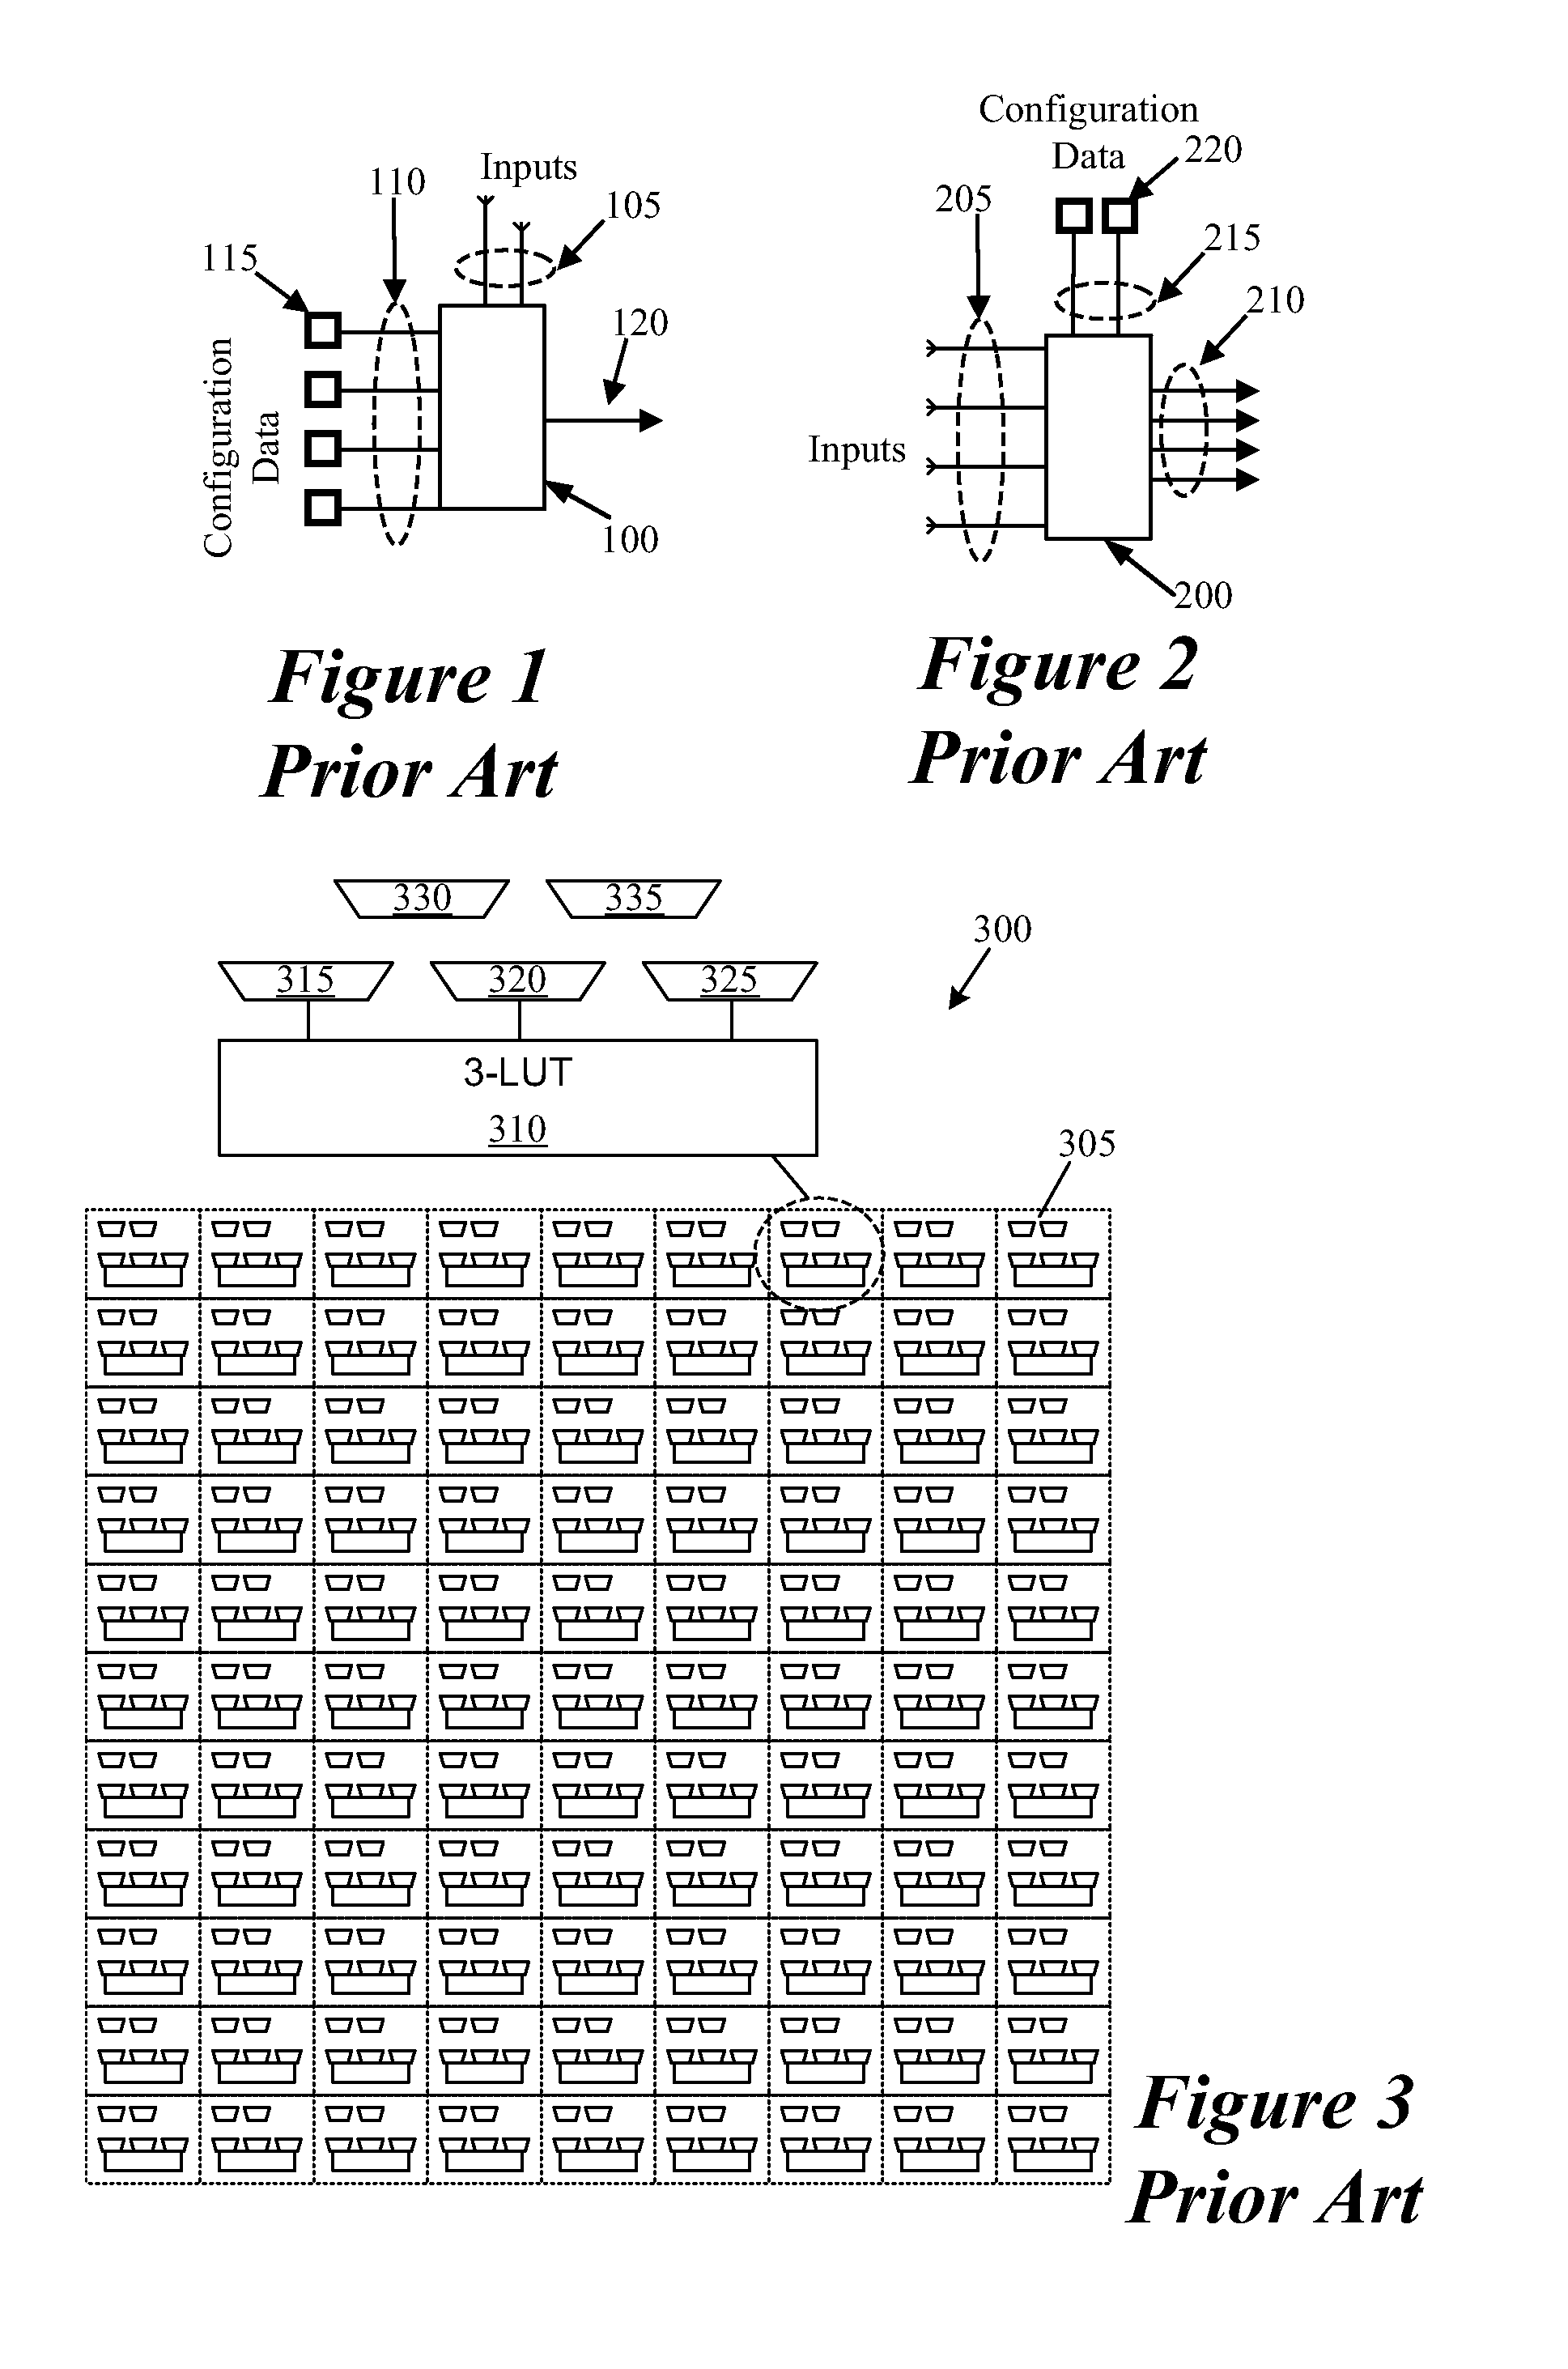 System and method for reducing reconfiguration power usage